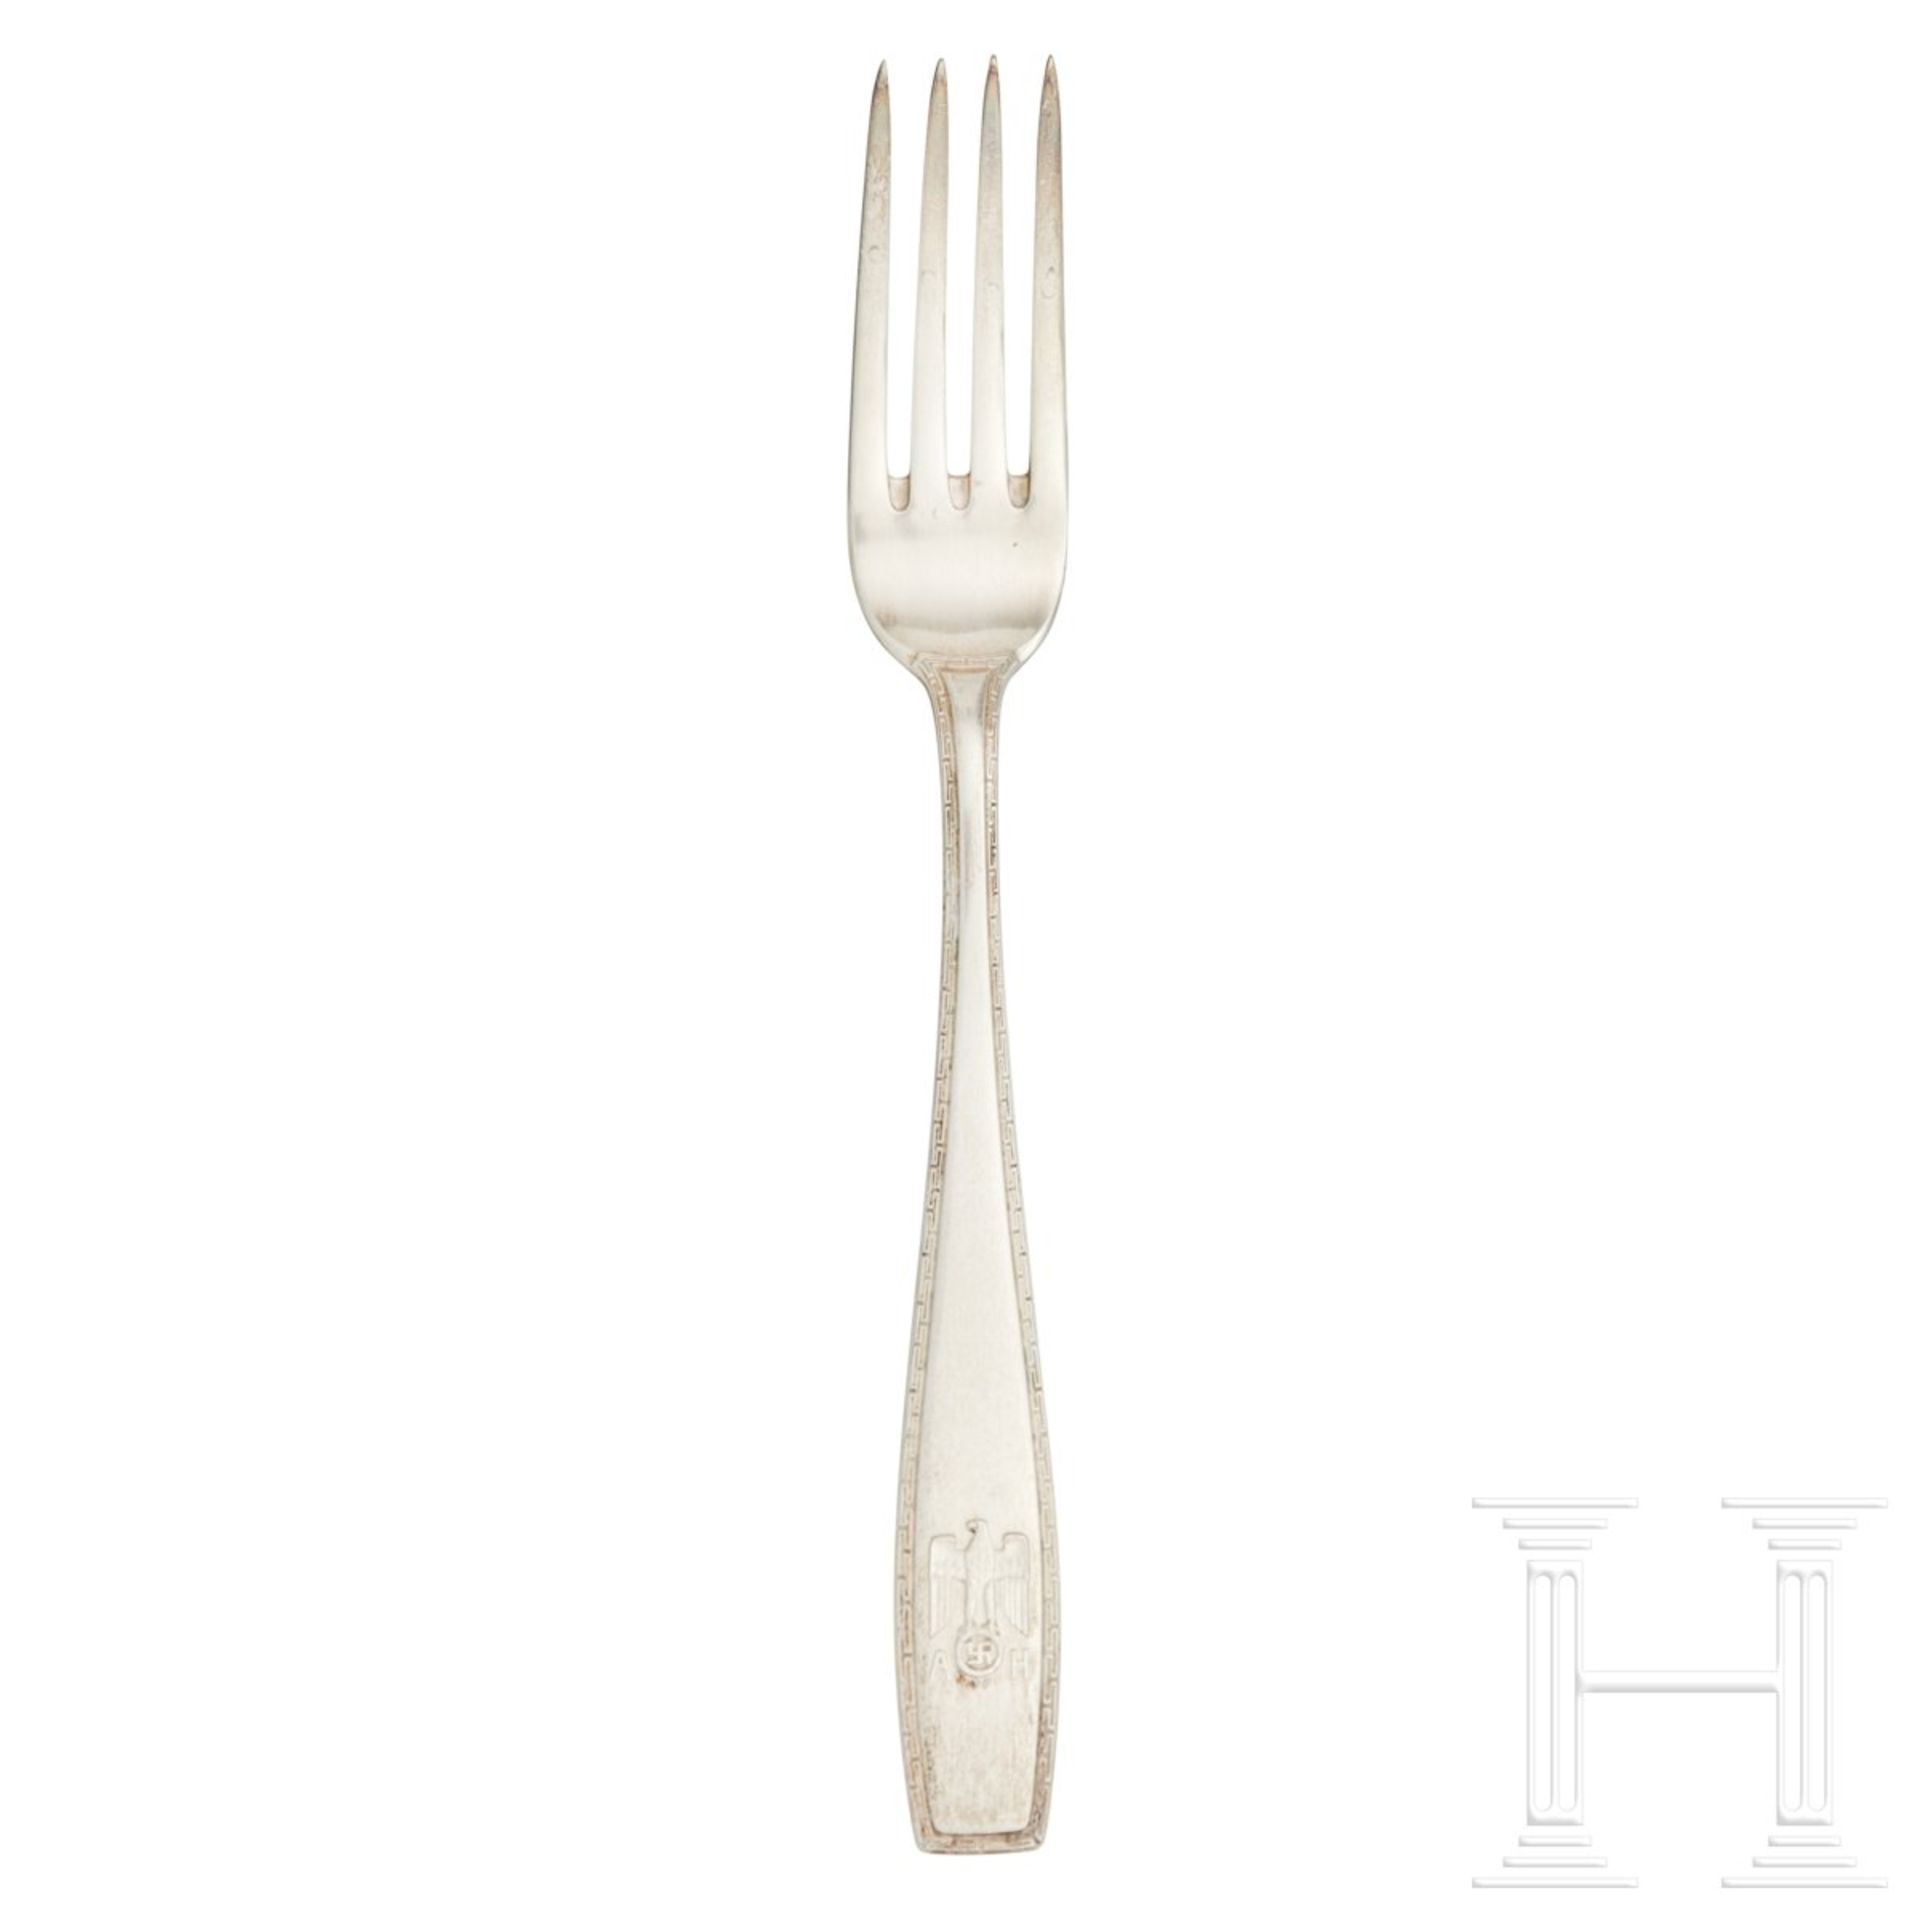 Adolf Hitler – a Lunch Fork from his Personal Silver Service